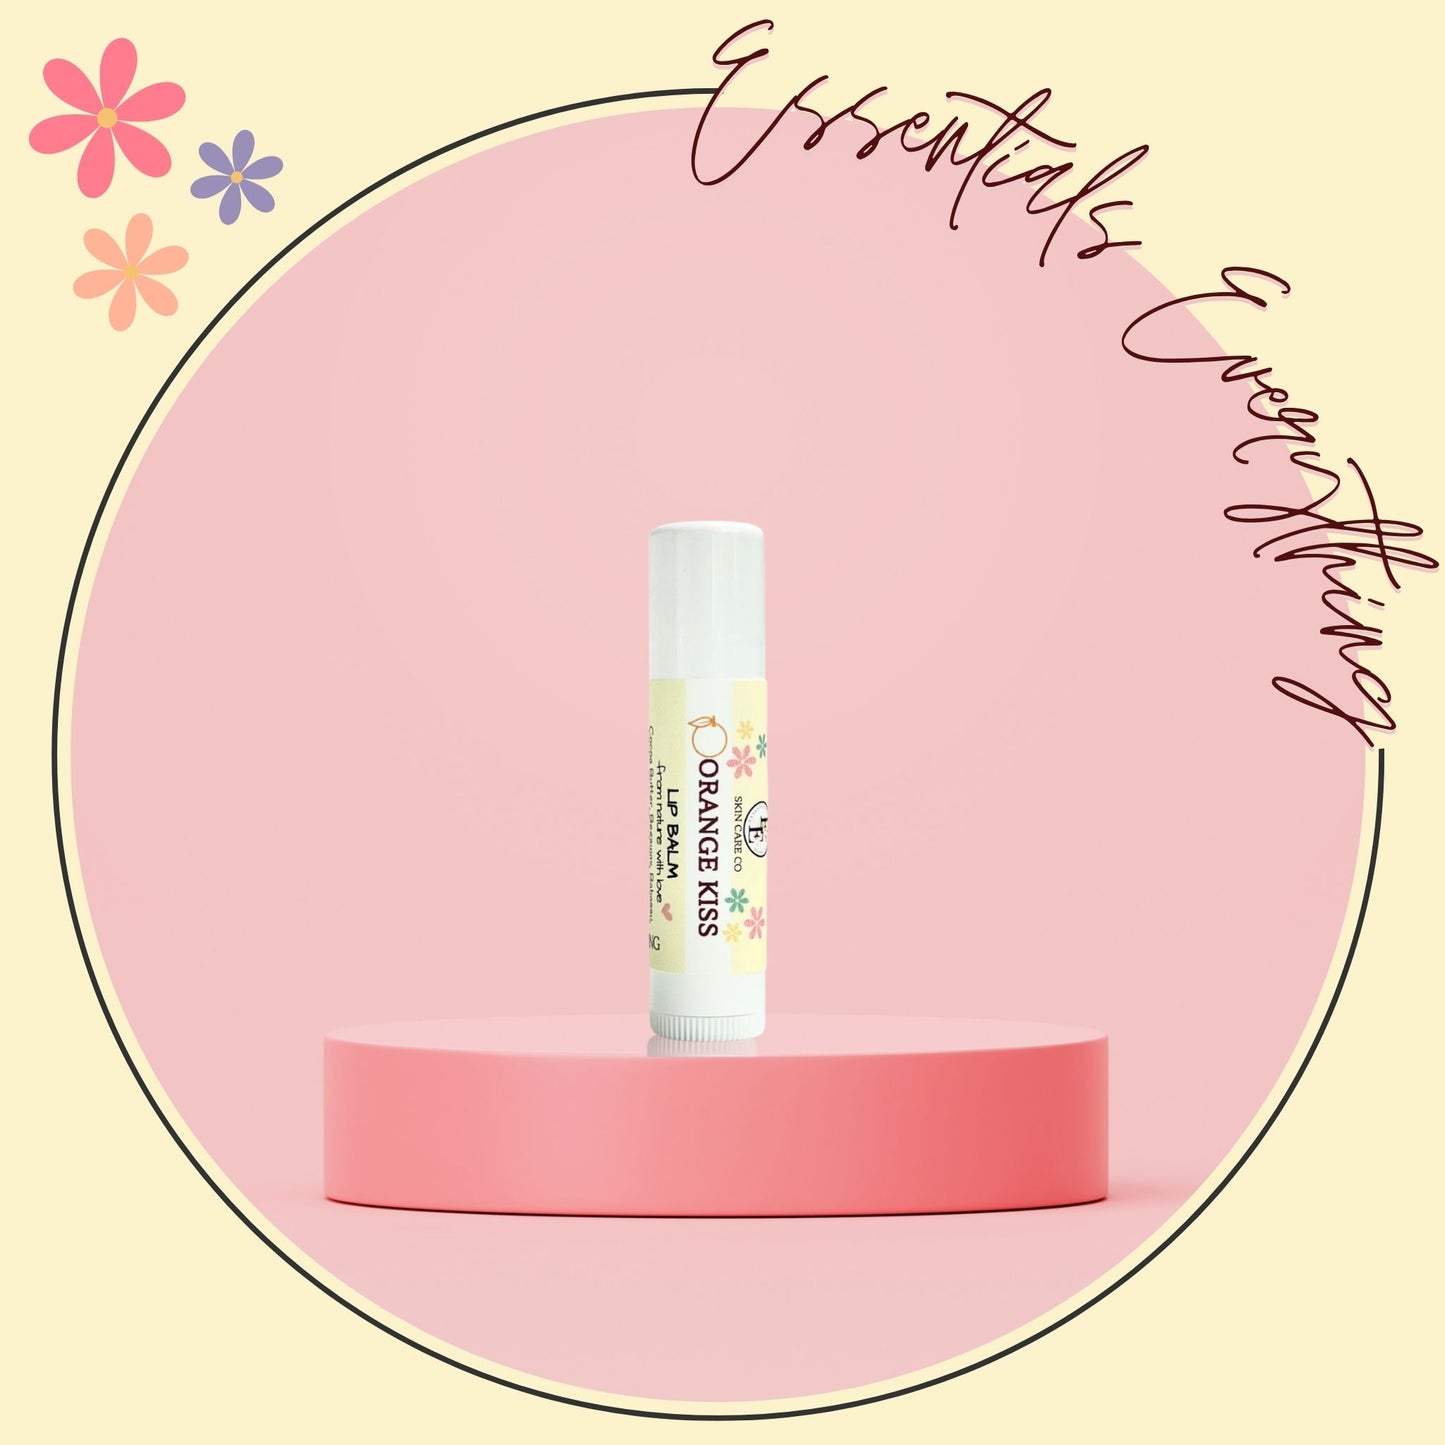 Orange Kiss - All Natural Lip Balm By Essentials Everything Skin Care Co. Organic, Vegan and Cruelty-Free